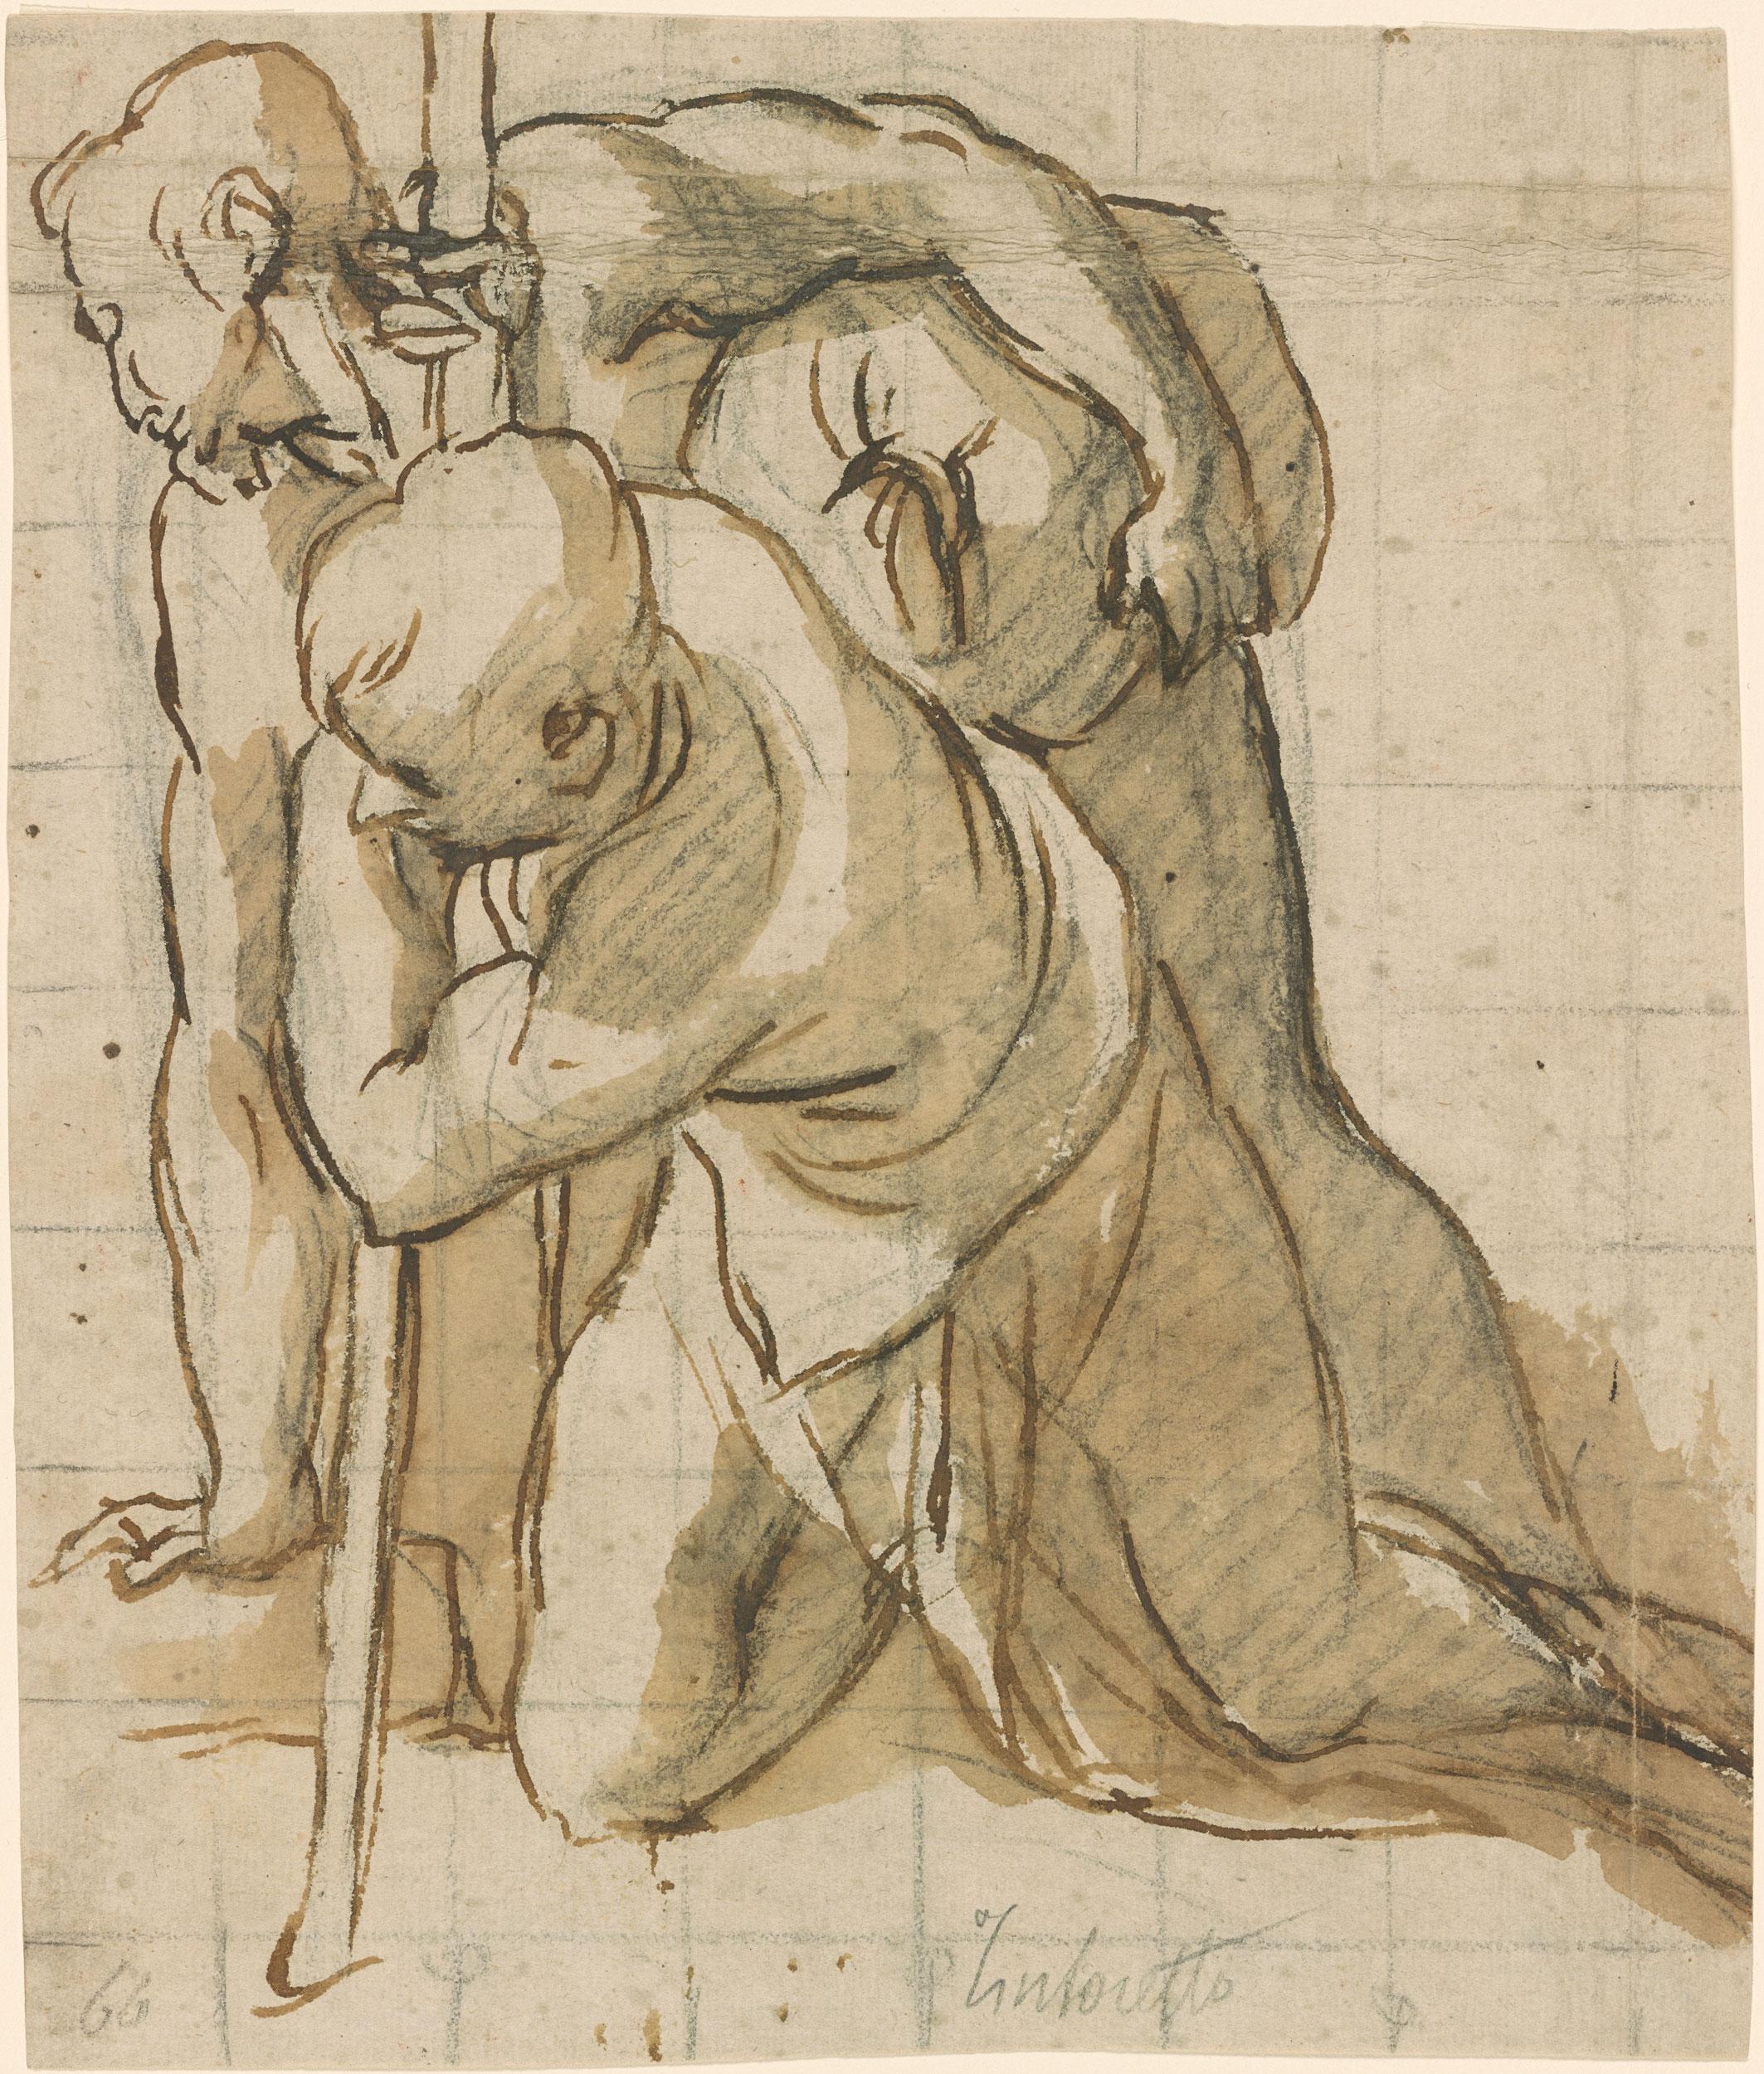 Minding the Time: New Dialogues with Old Master Drawings